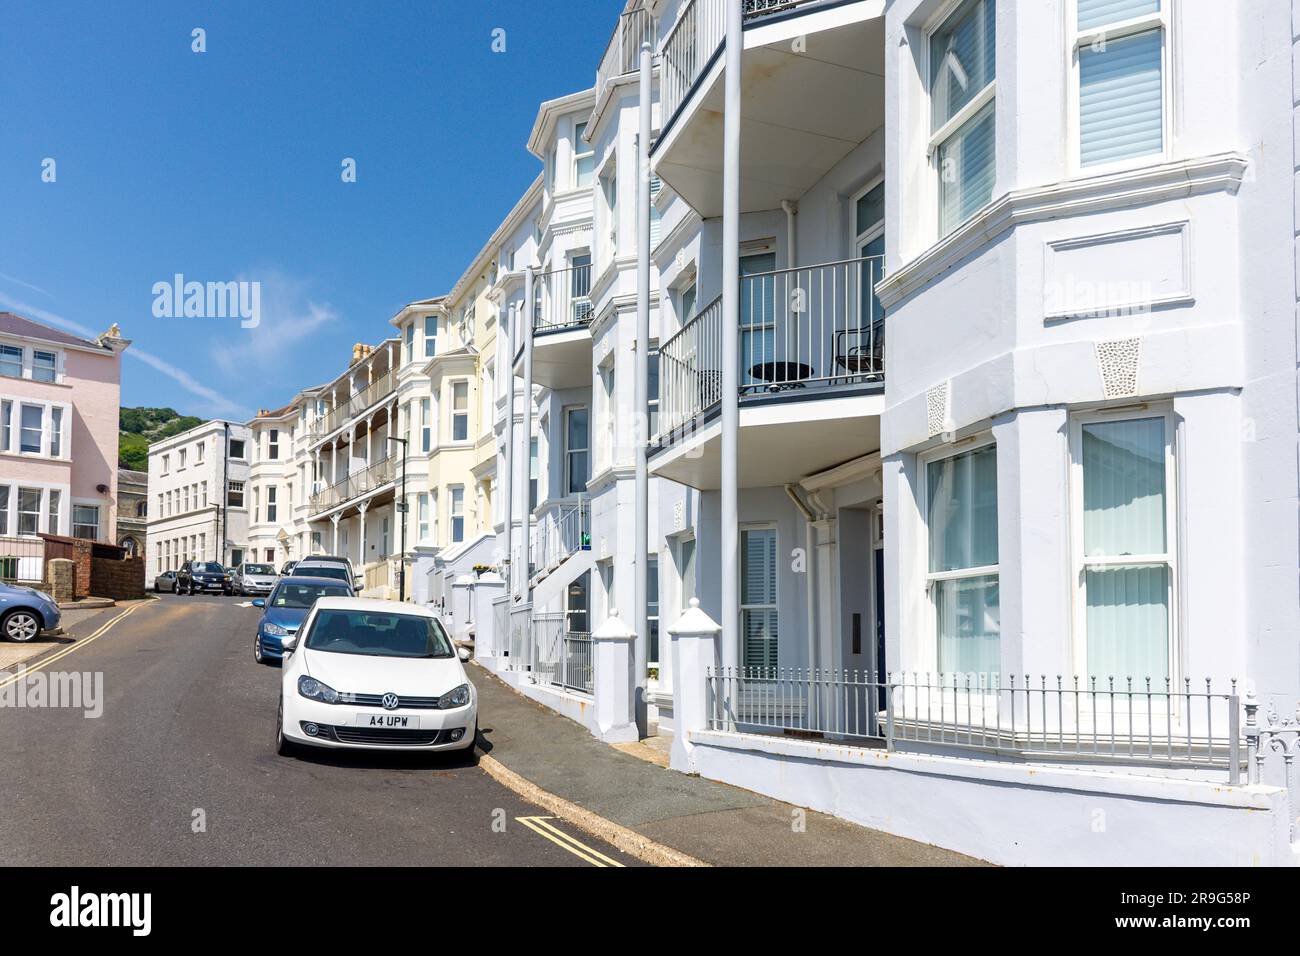 Period seafront buildings, Hambrough Road, Vetnor, Isle of Wight, England, United Kingdom Stock Photo